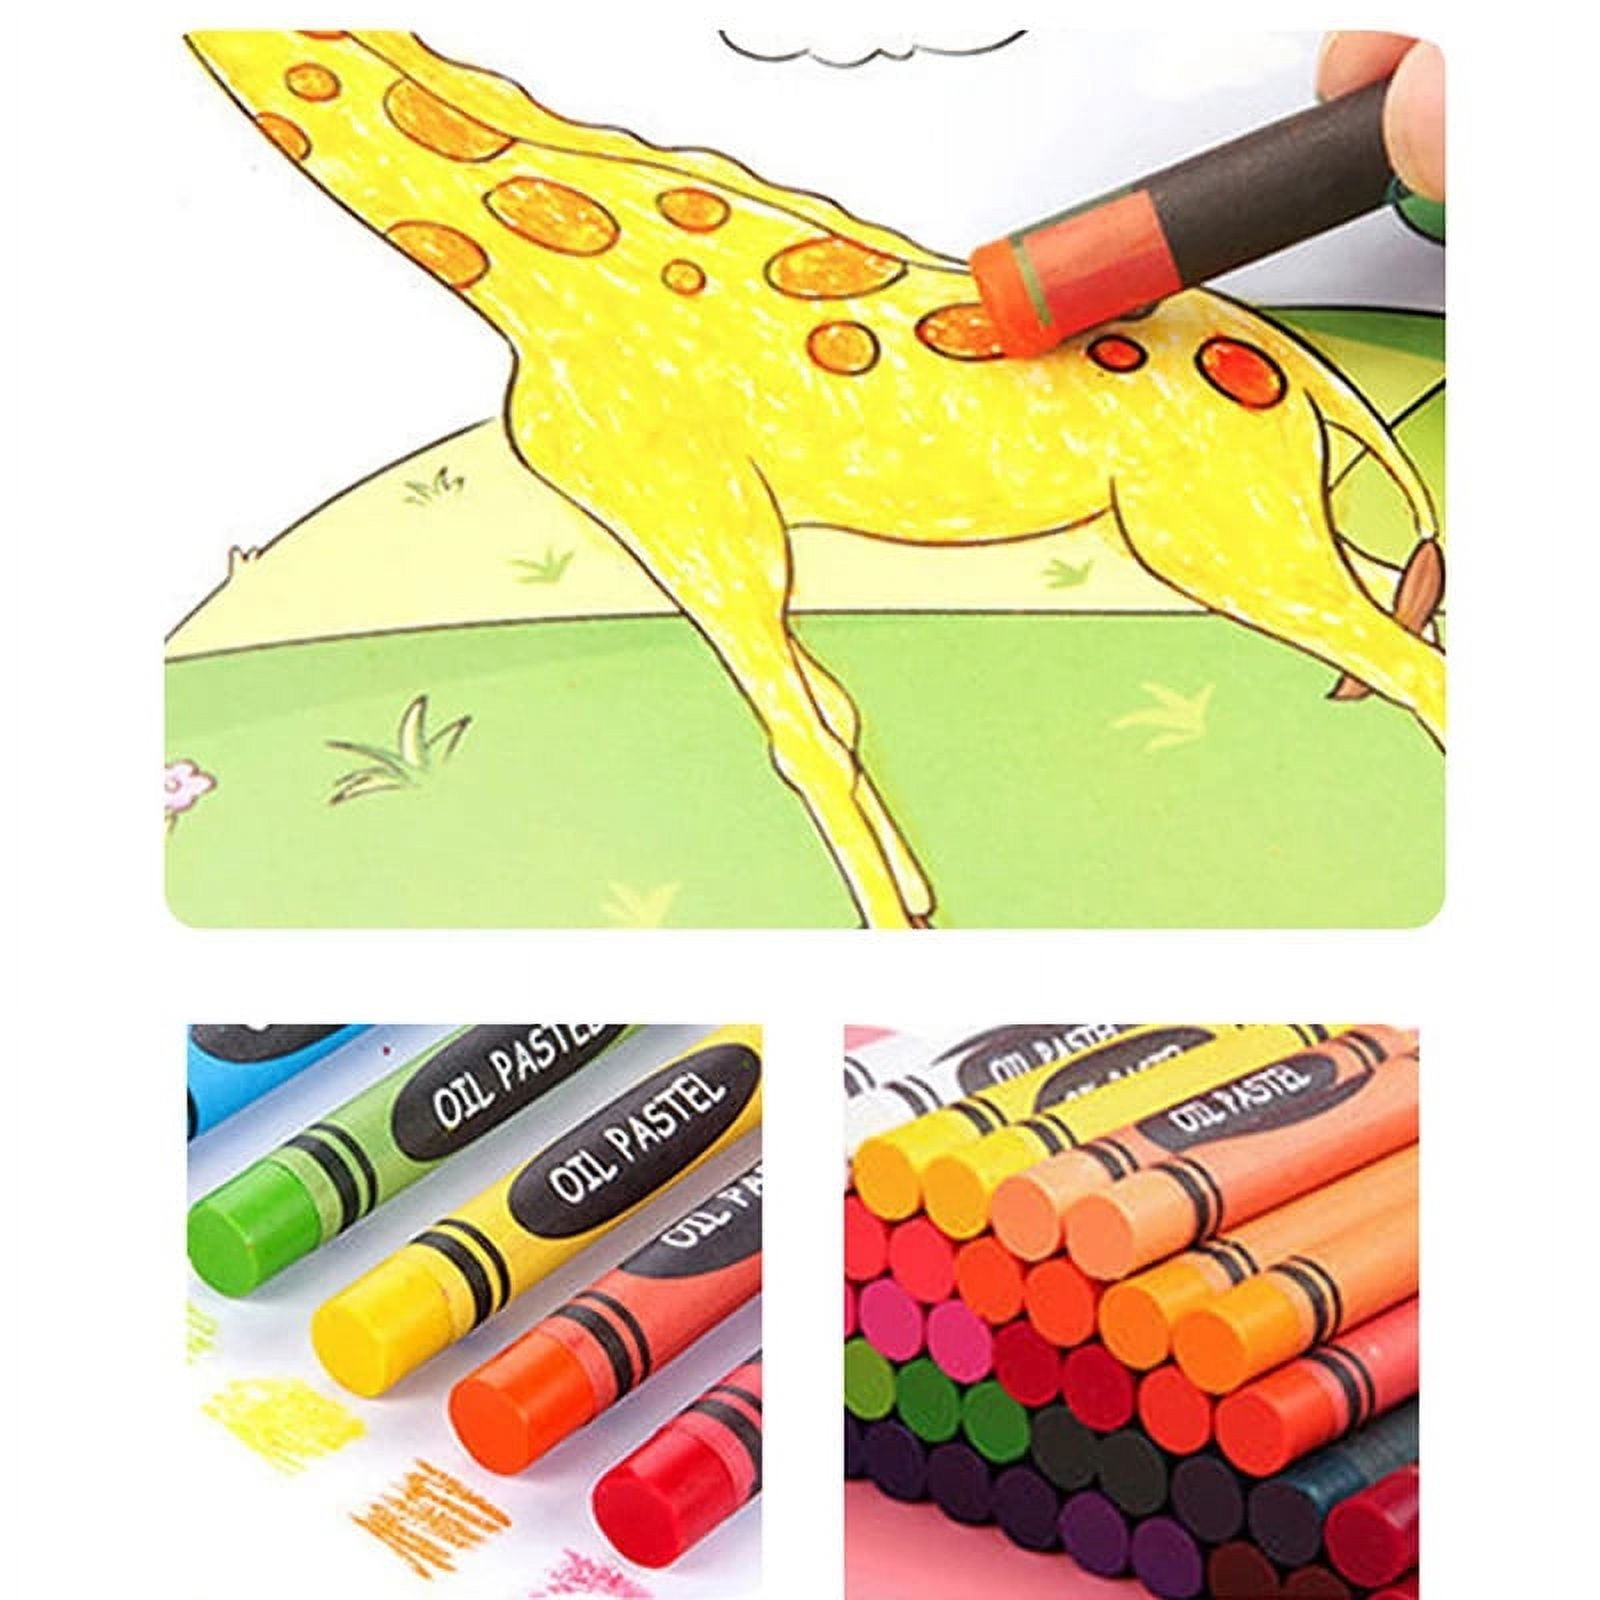  H & B 208-Piece Art Supplies Kit for Painting & Drawing,Kids  Art Set Case, Portable Art Box, Oil Pastels, Crayons, Colored Pencils,  Markers, Great Gift for Kids, Girls, Boys, Teens